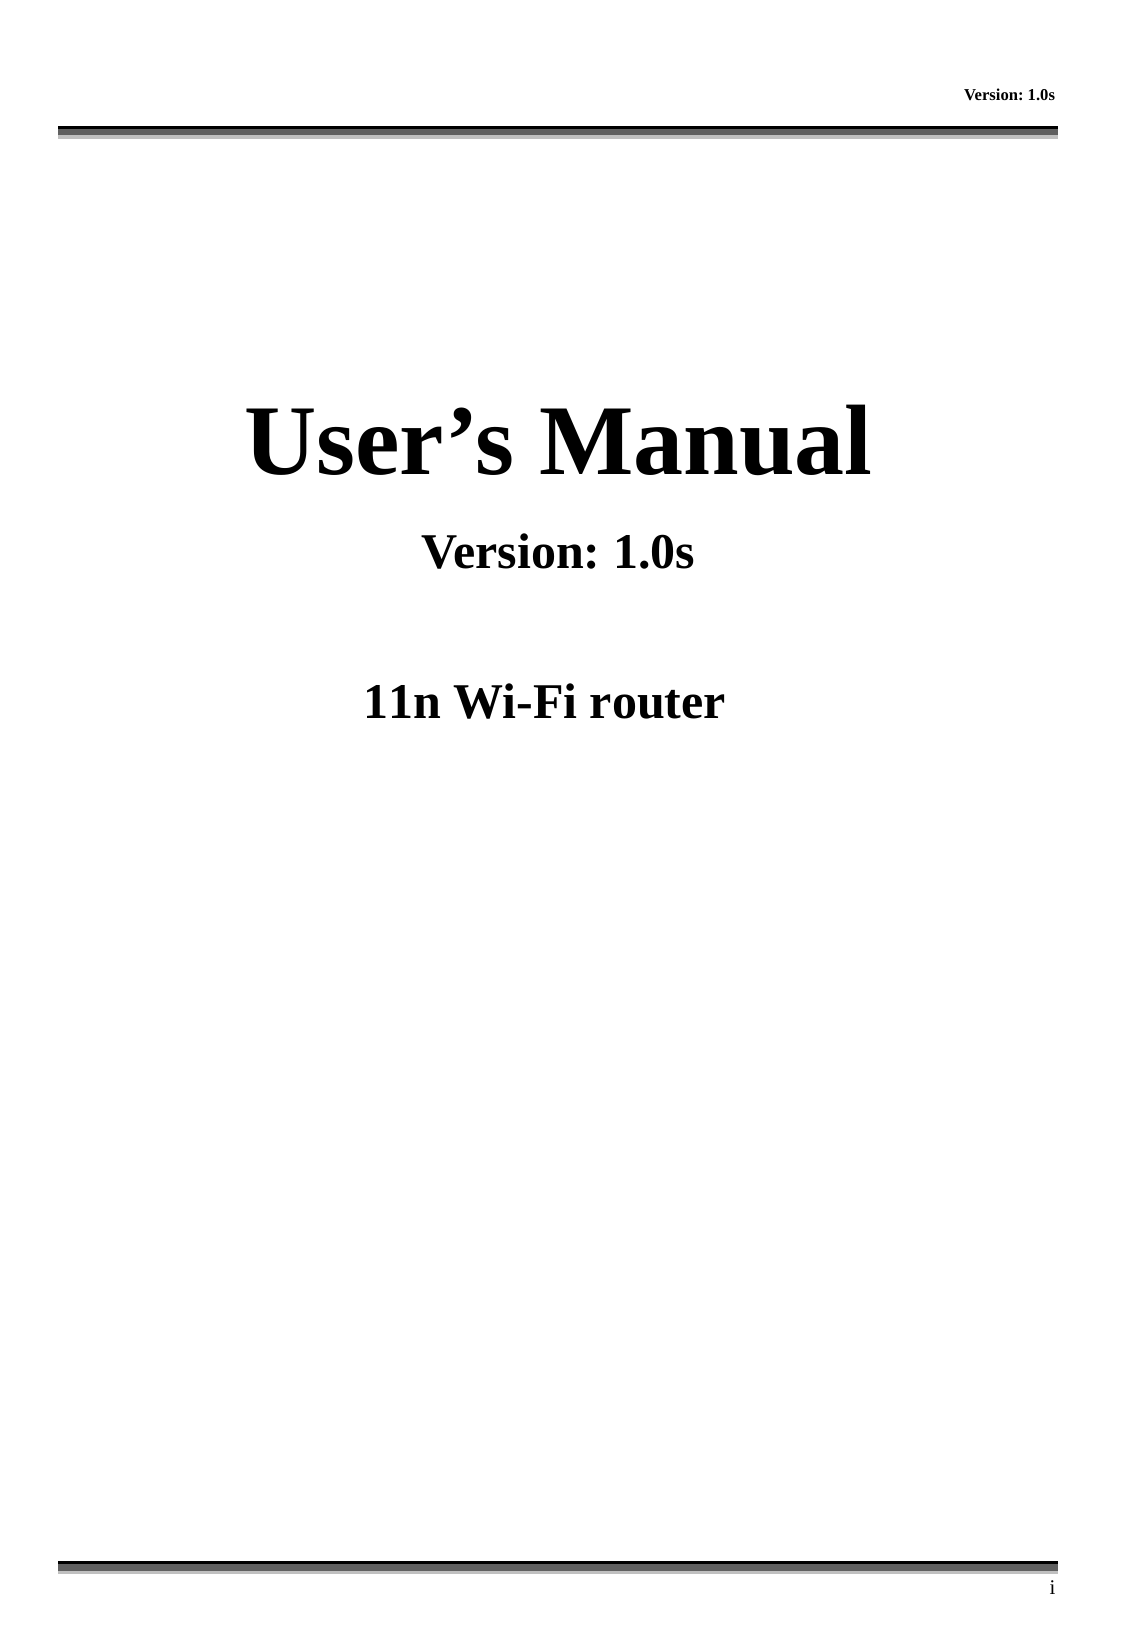     Version: 1.0s      i    User’s Manual Version: 1.0s               11n Wi-Fi router 